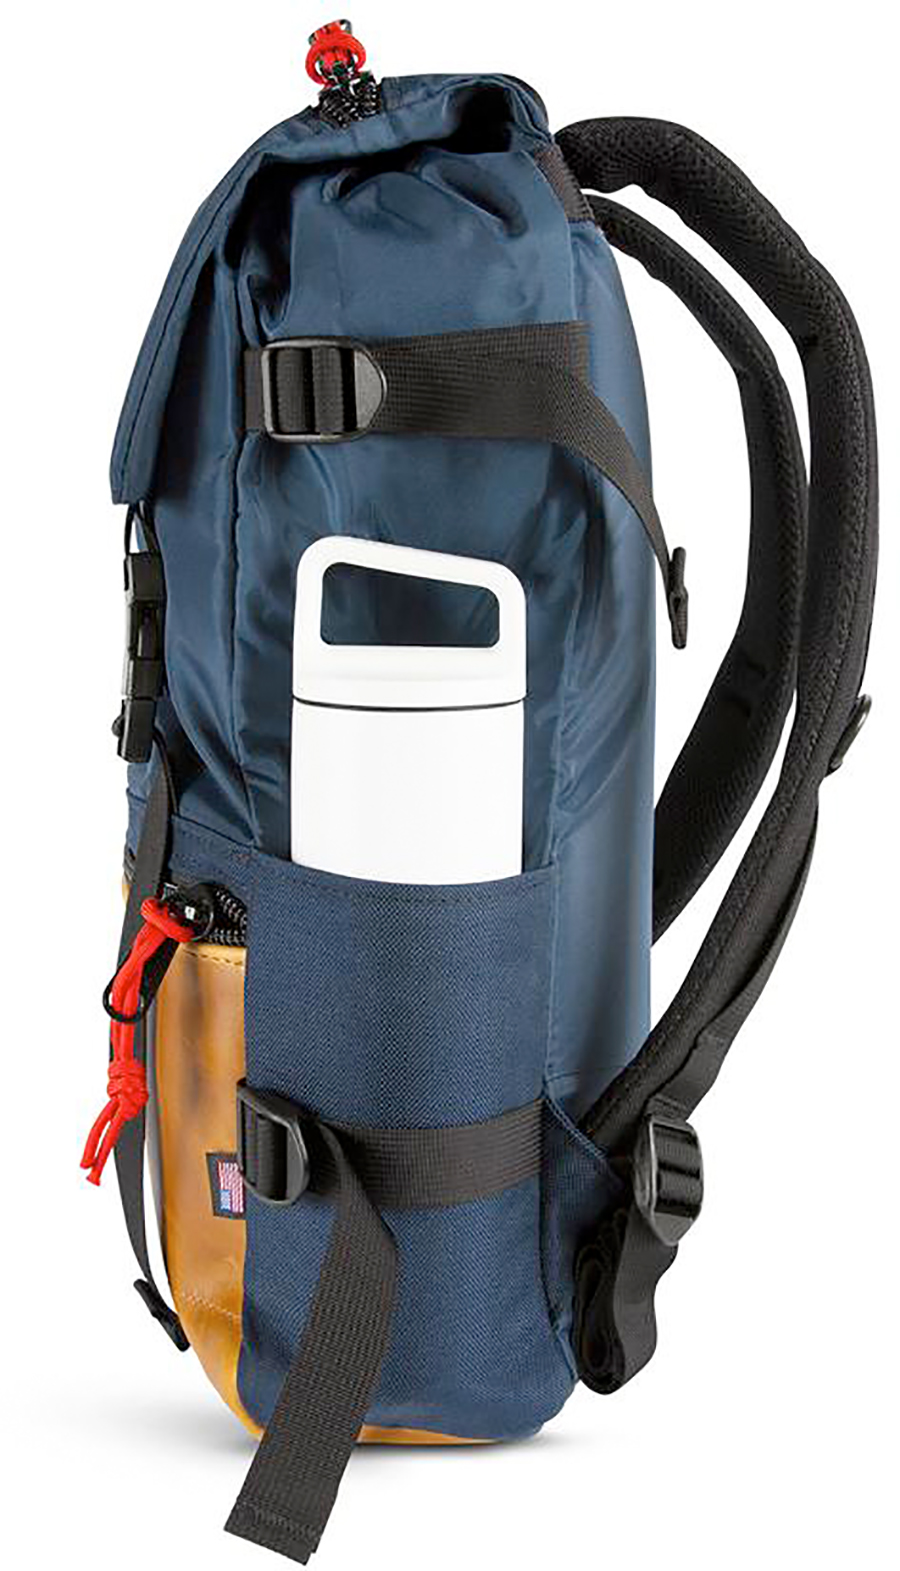 Topo Designs Rover Pack Heritage Outdoor Daypack